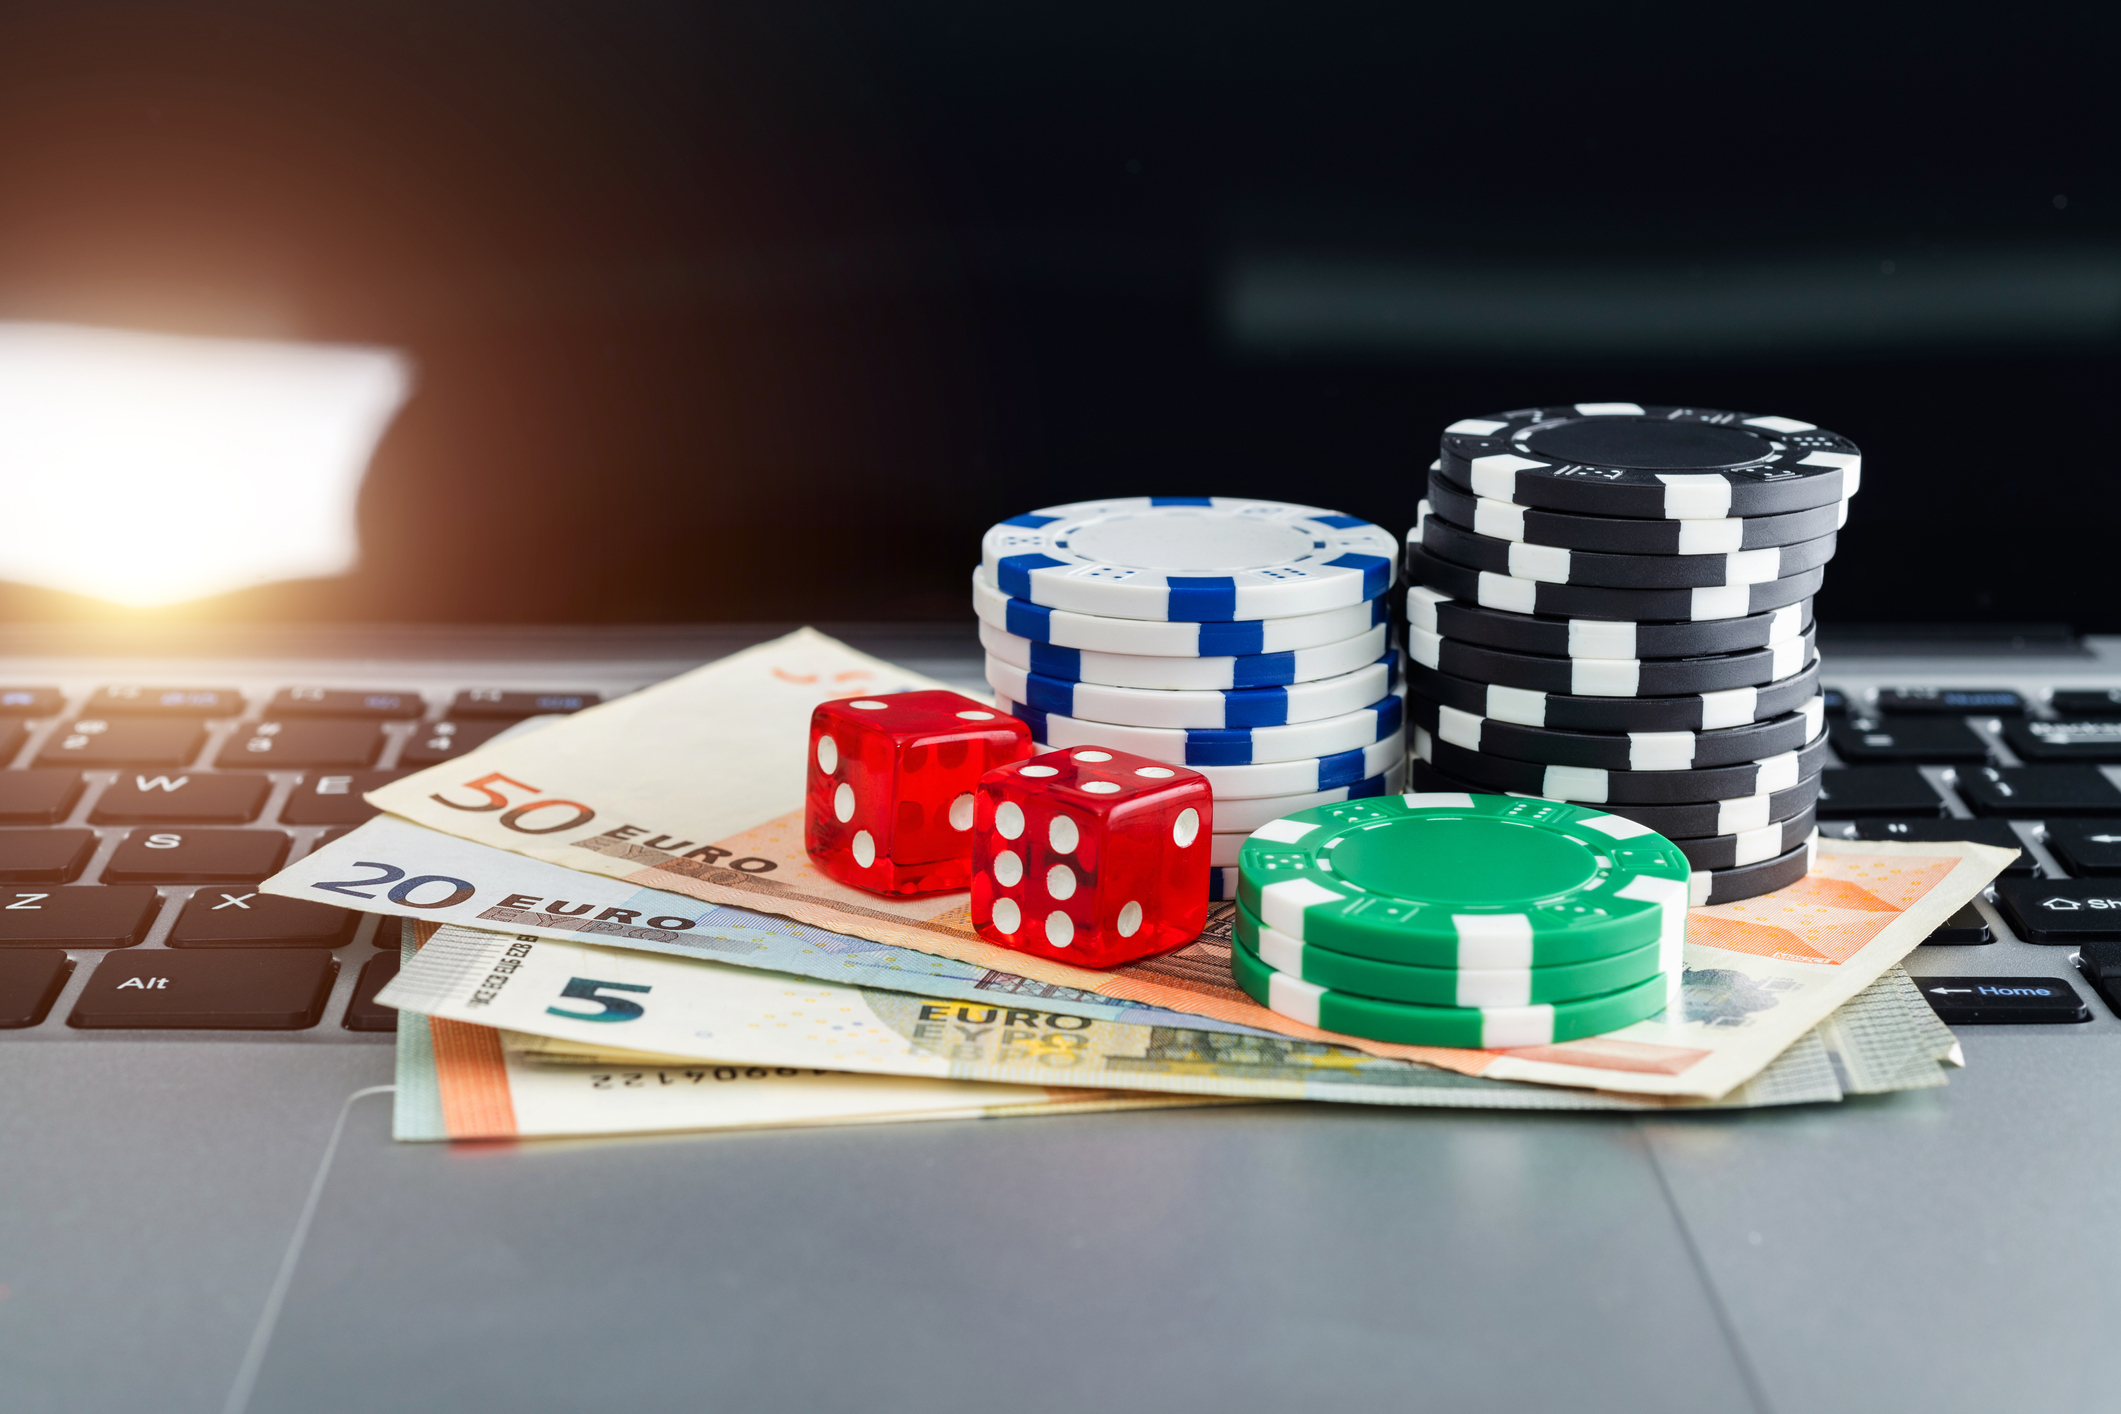 Finnish Government Plans to End Veikkaus' Gambling Monopoly by 2027, Establishing New Regulated Market